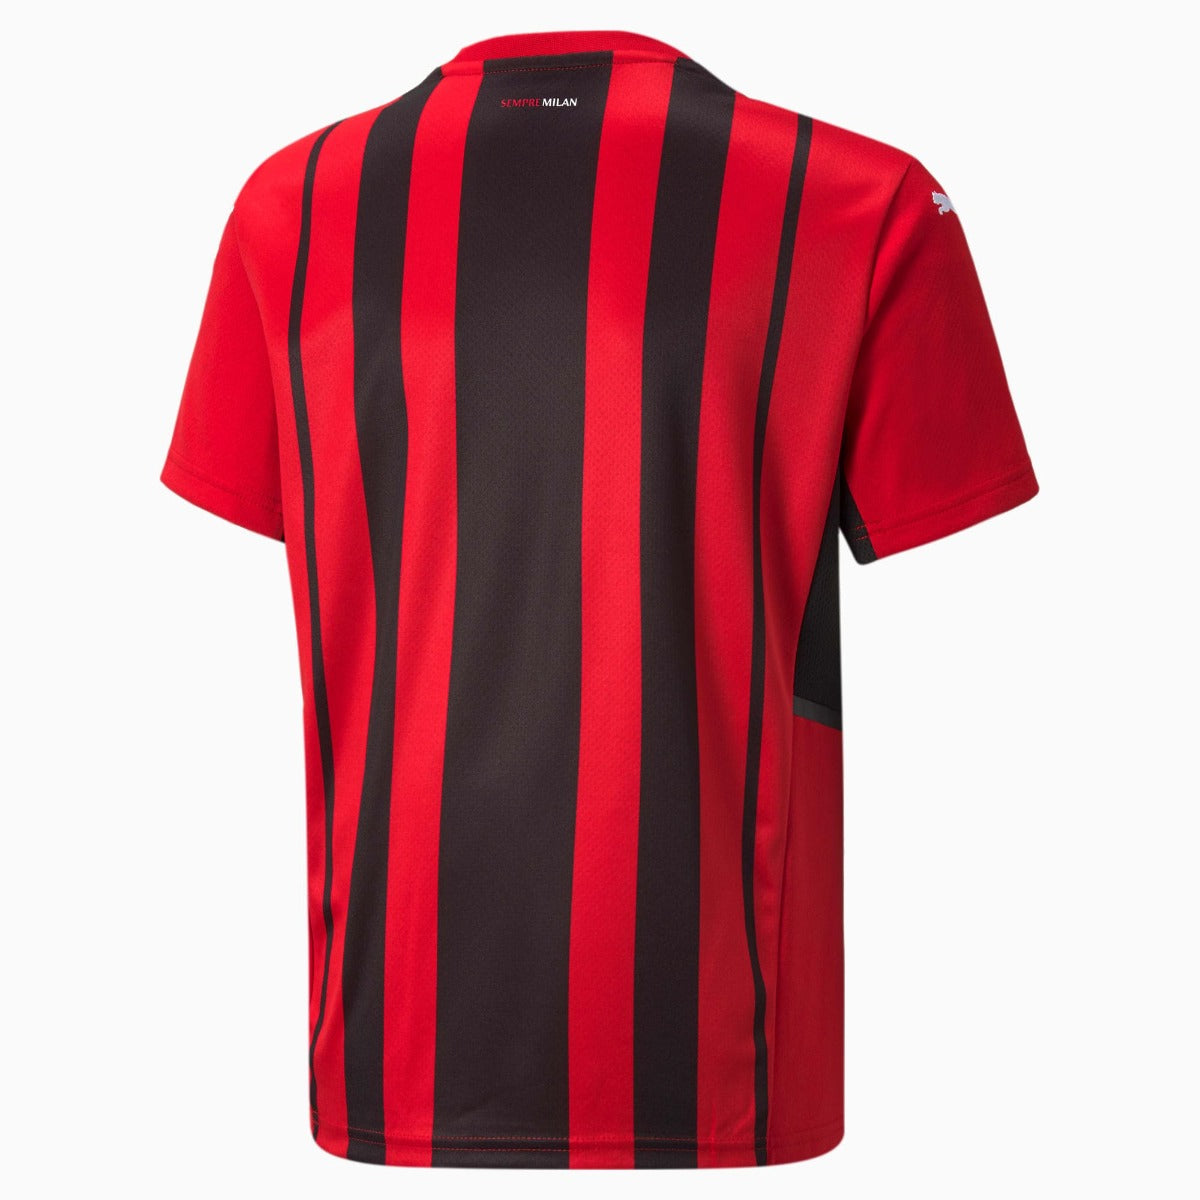 Puma 2021-22 AC Milan Youth Home Jersey - Red-Black (Back)